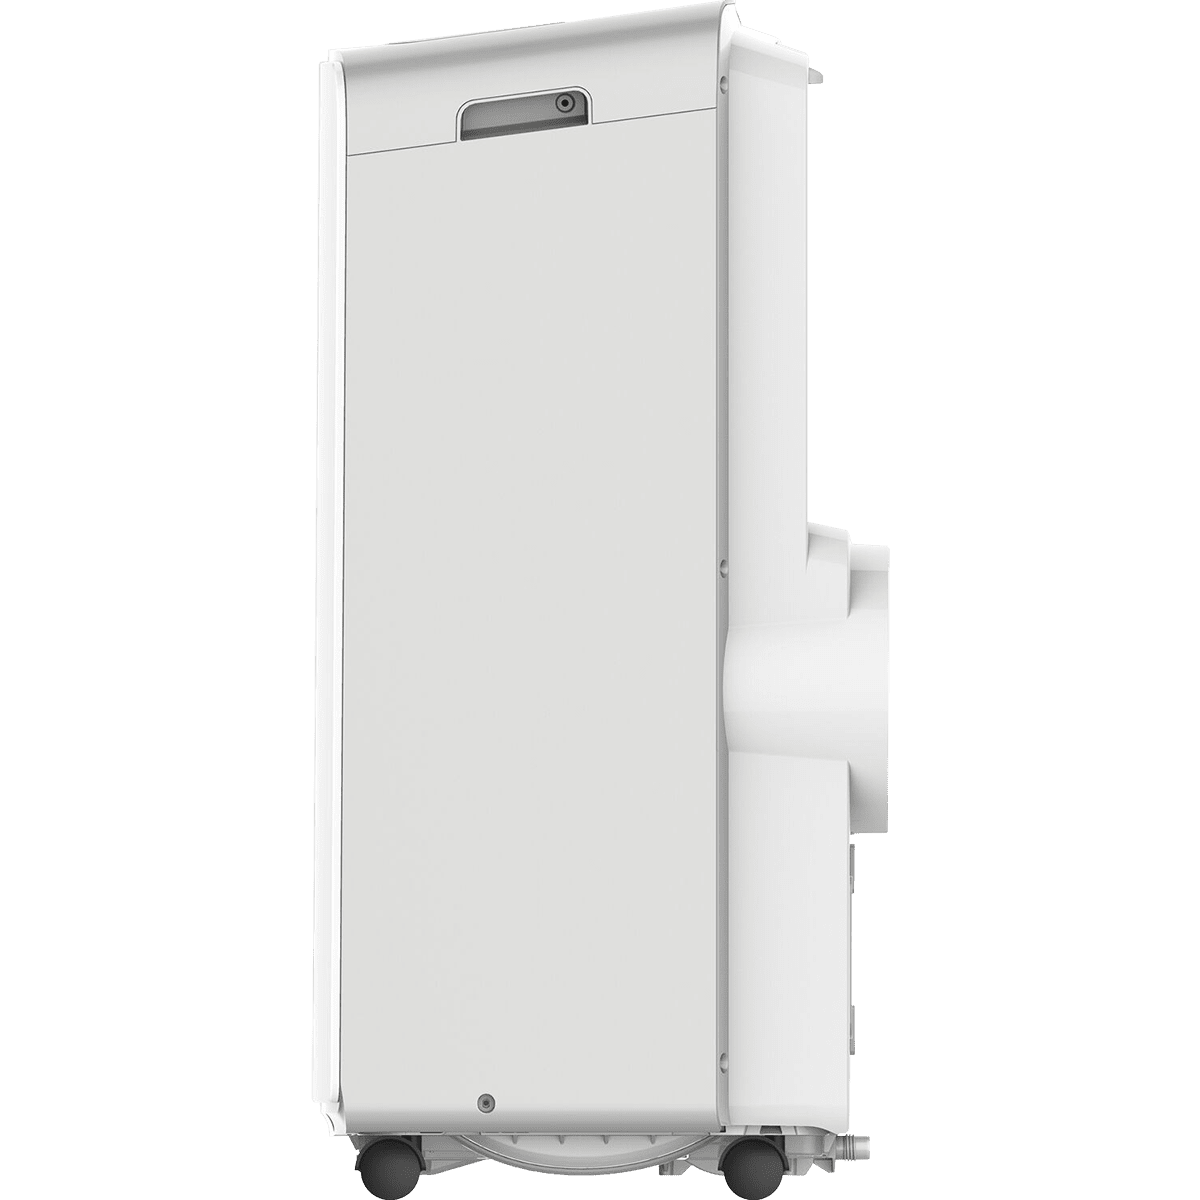 Keystone Portable Keystone 115V Portable Heat/Cool Air Conditioner with Follow Me Remote Control for a Room up to 350 Sq. Ft.